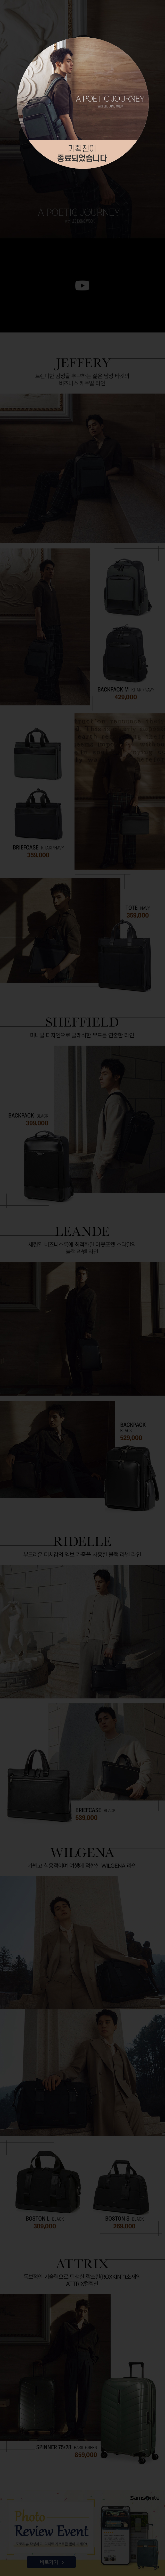 A POETIC JOURNEY with LEE DONG WOOK 기획전이 종료되었습니다